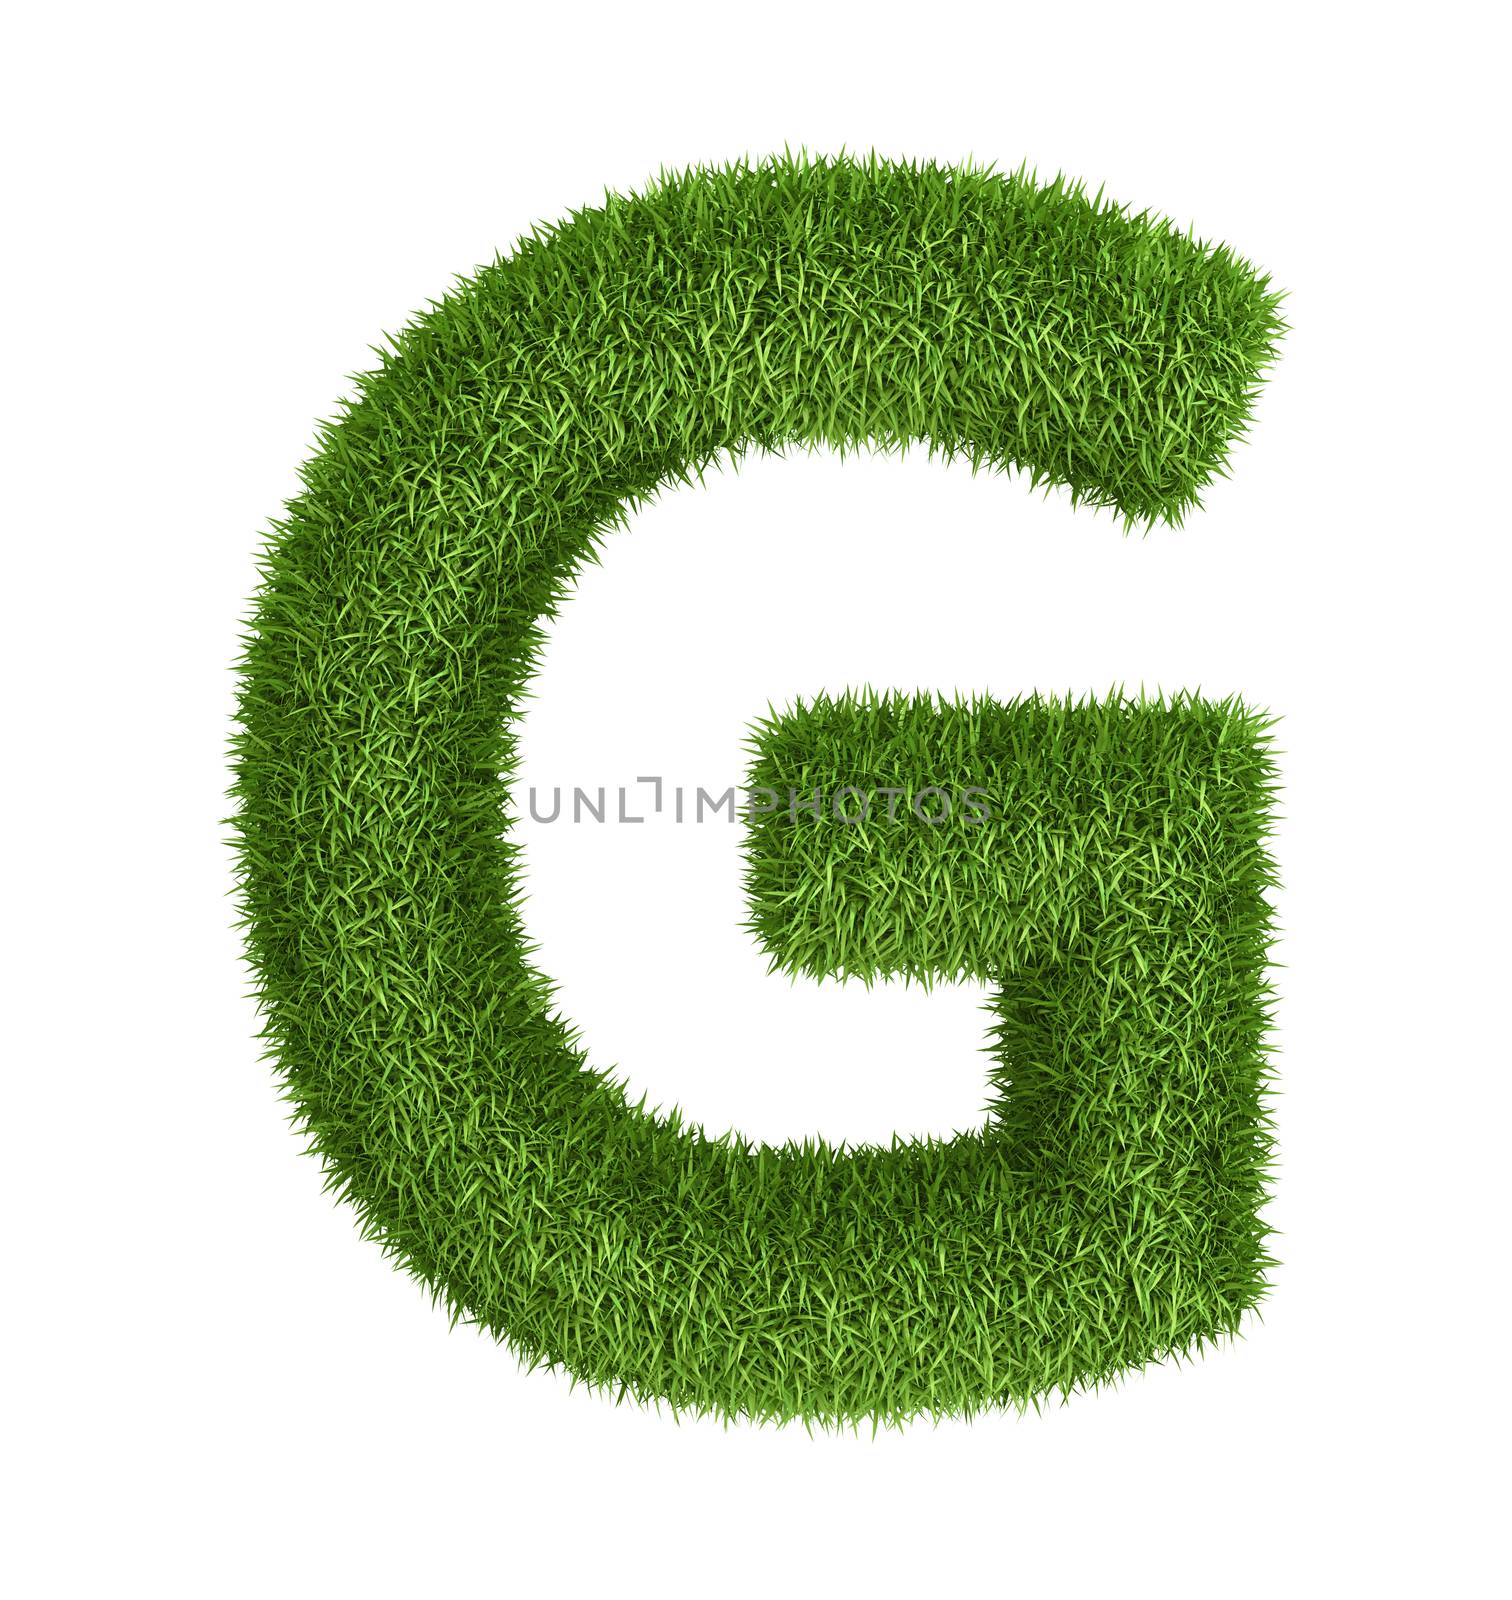 Letter  G isolated photo realistic grass ecology theme on white